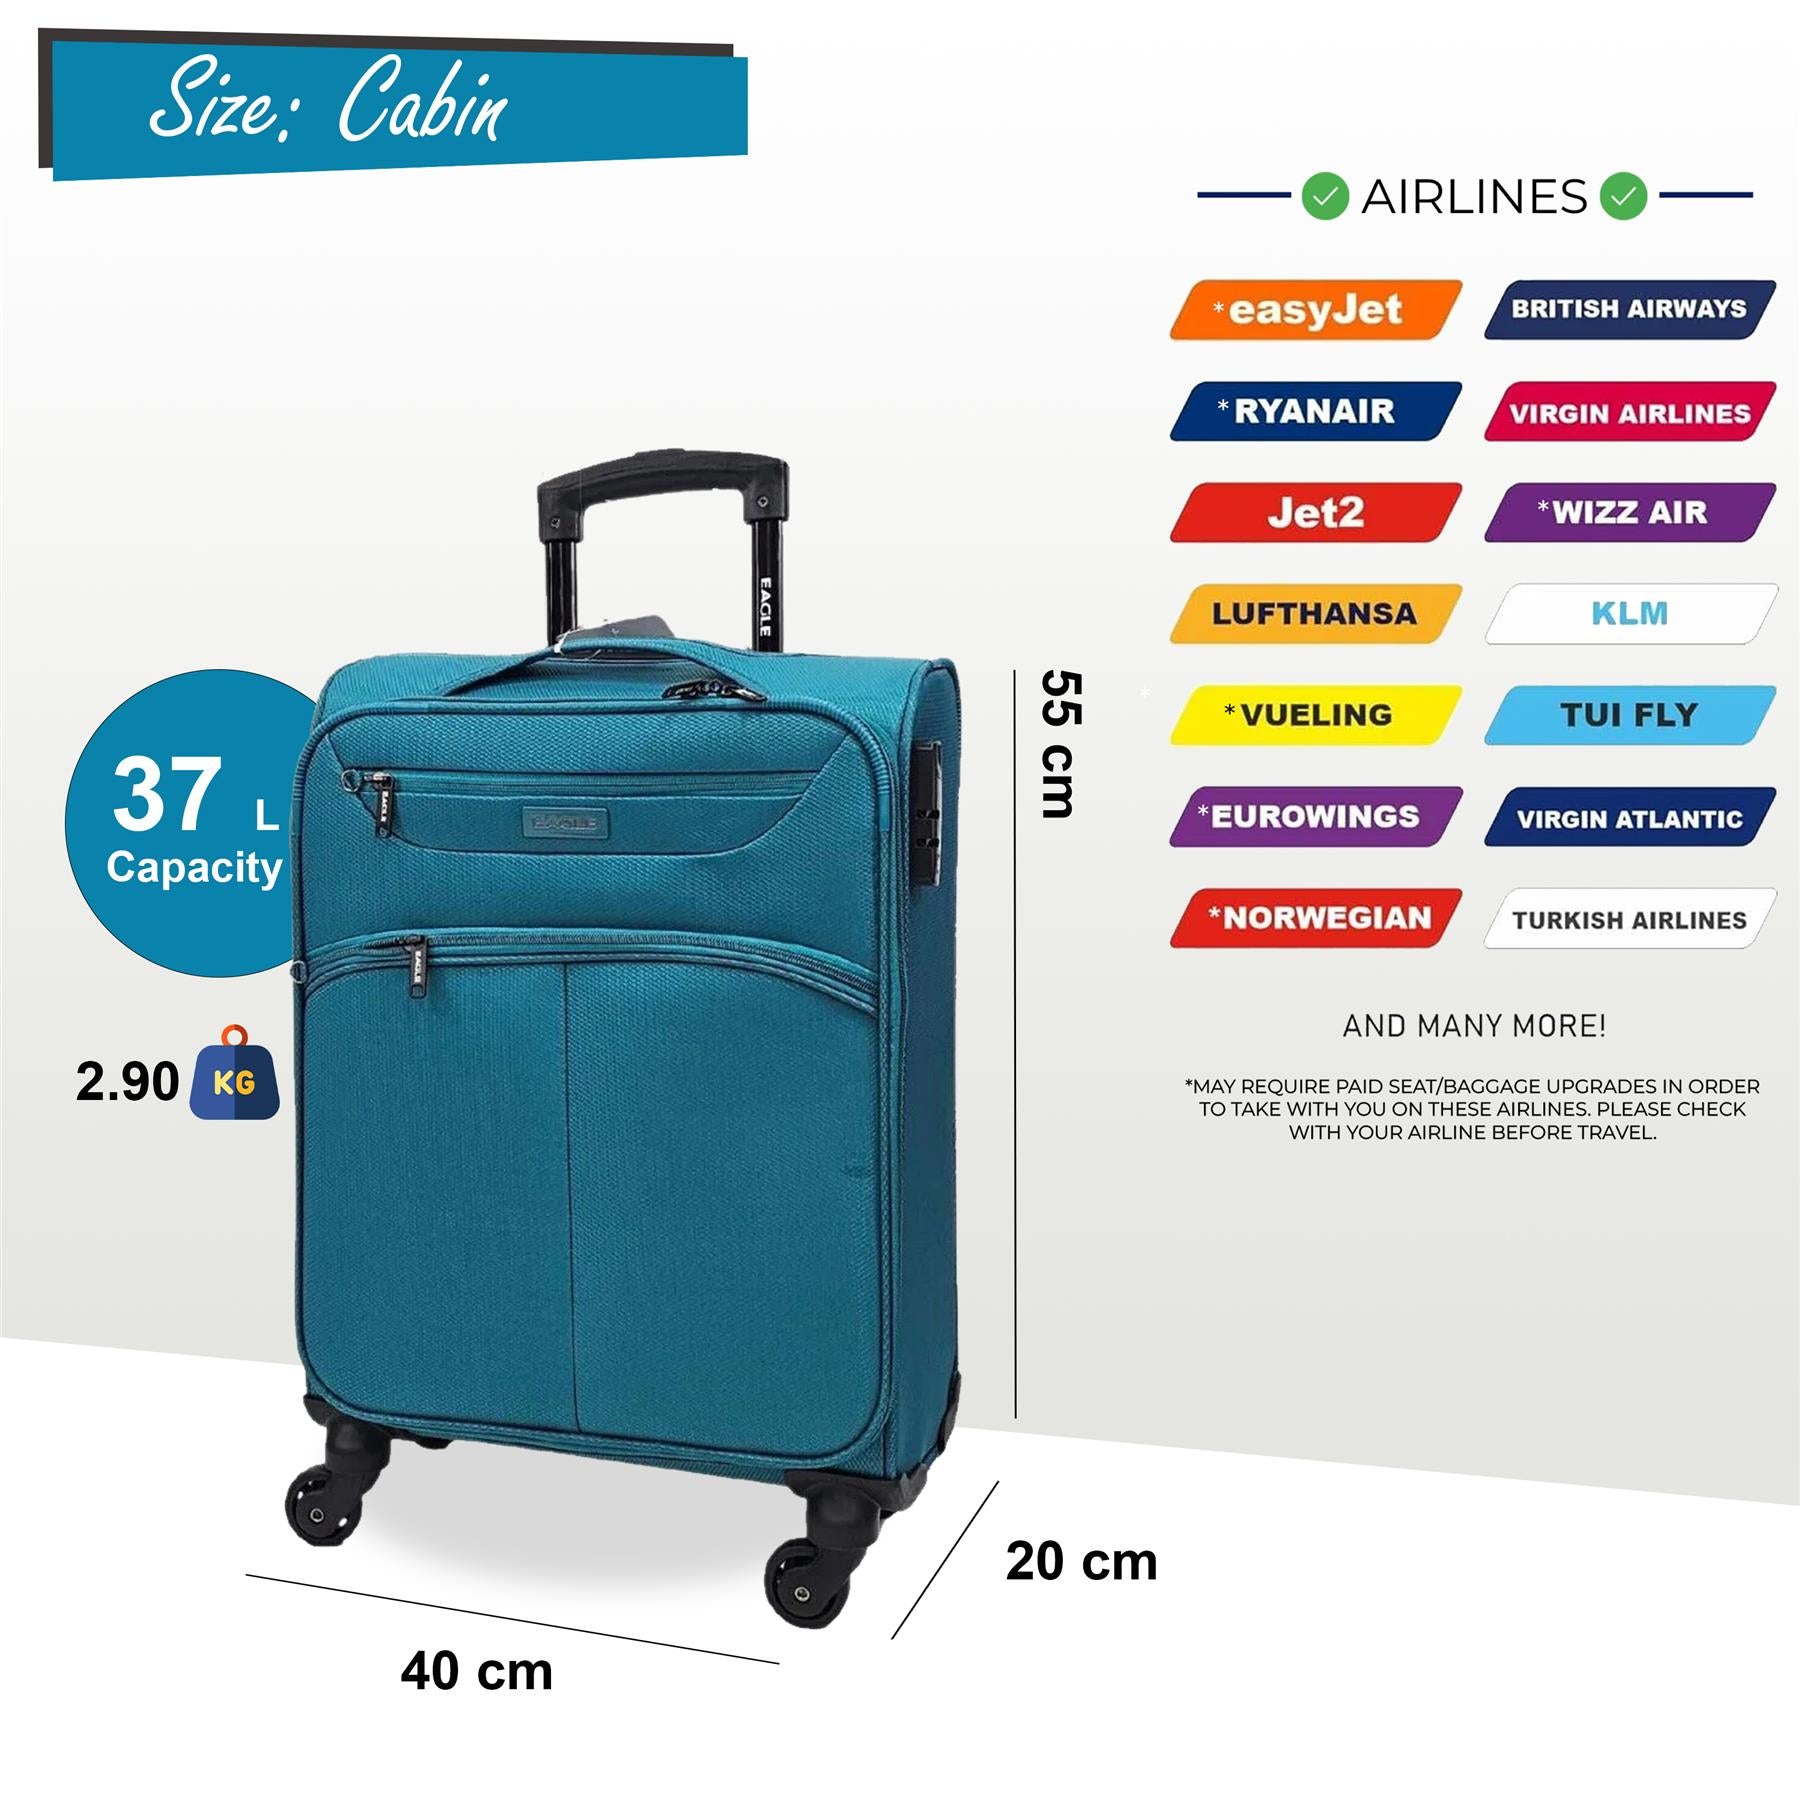 Baileyton Cabin Soft Shell Suitcase in Teal